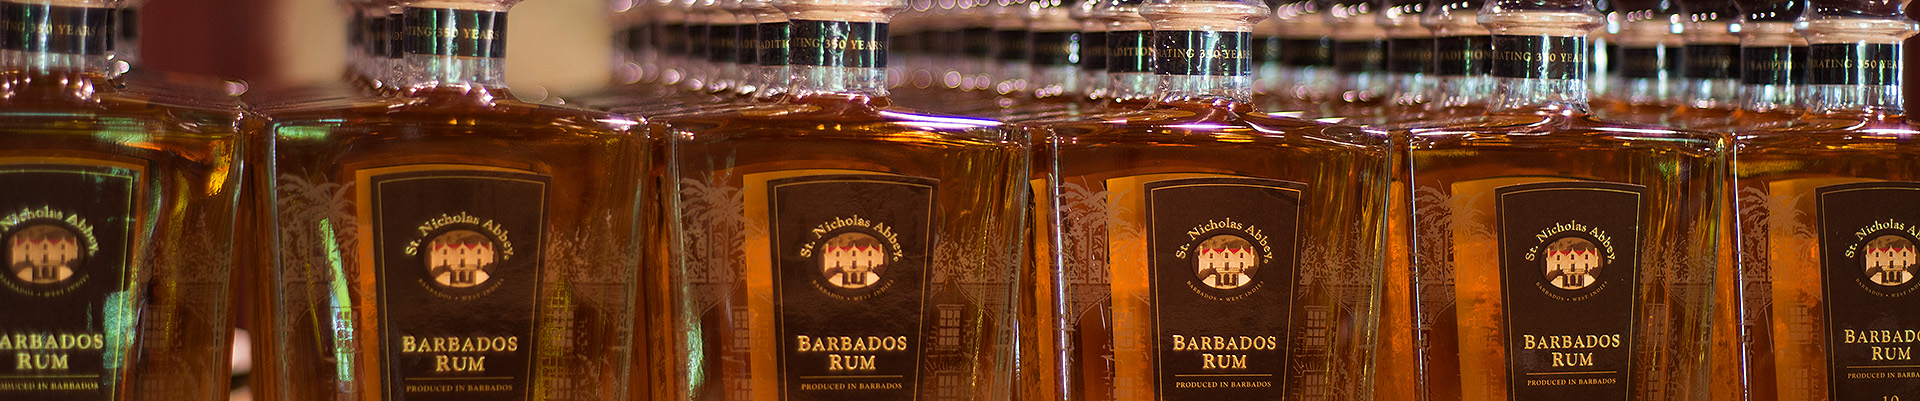 Our Rums - RUM OurRumsHeader 1920x400